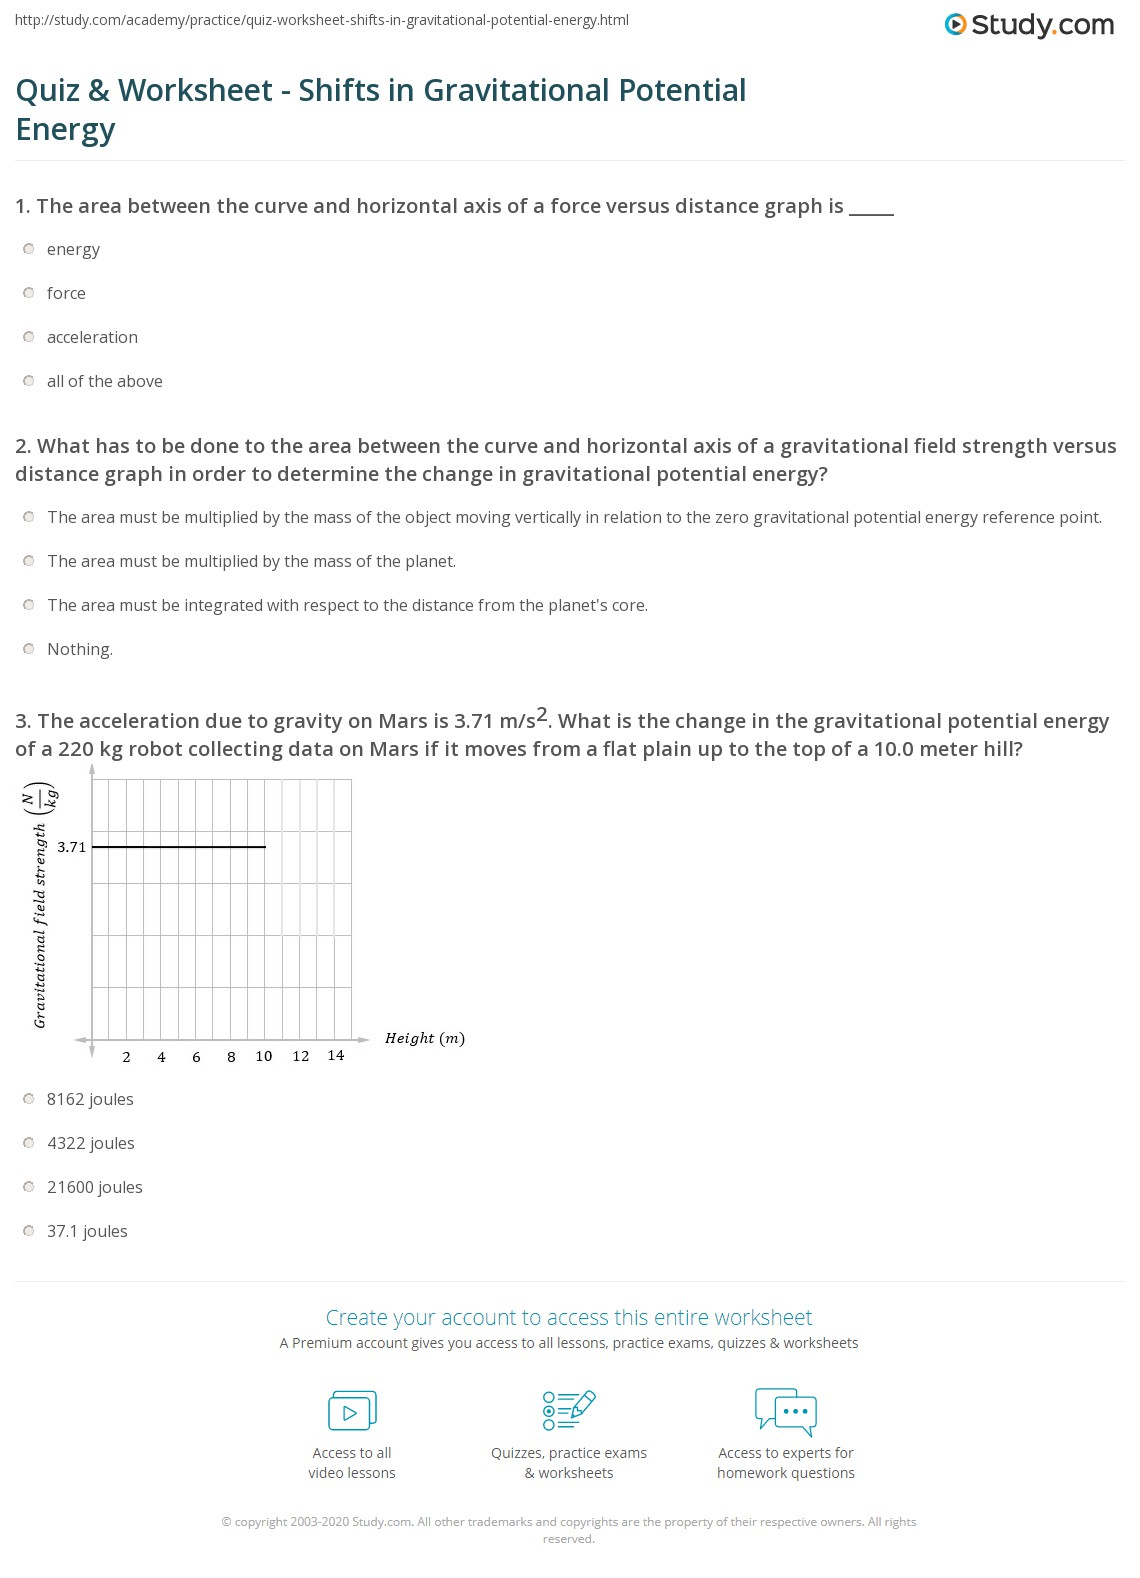 Quiz Worksheet Shifts In Gravitational Potential Energy Study